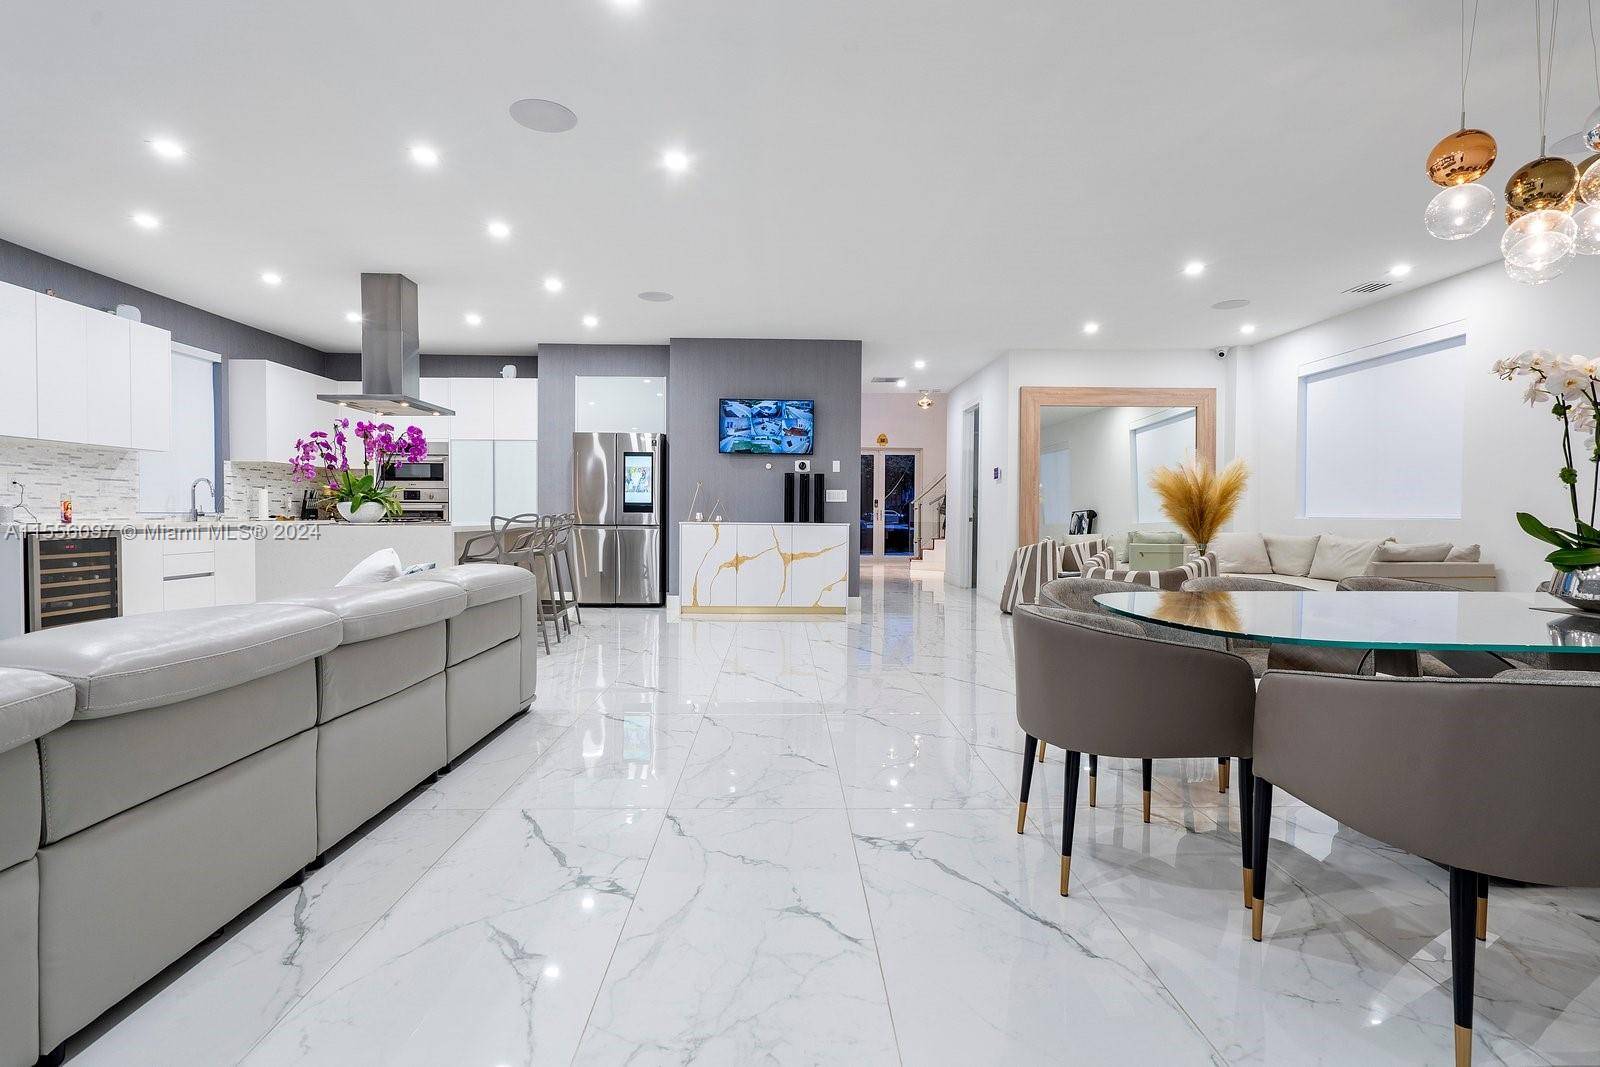 This Spectacular Corner Single family home at Modern Doral features a open floor on first floor, high ceilings, fully upgrades 200k Interior designed decoration that includes Italian porcelanato and wood ...